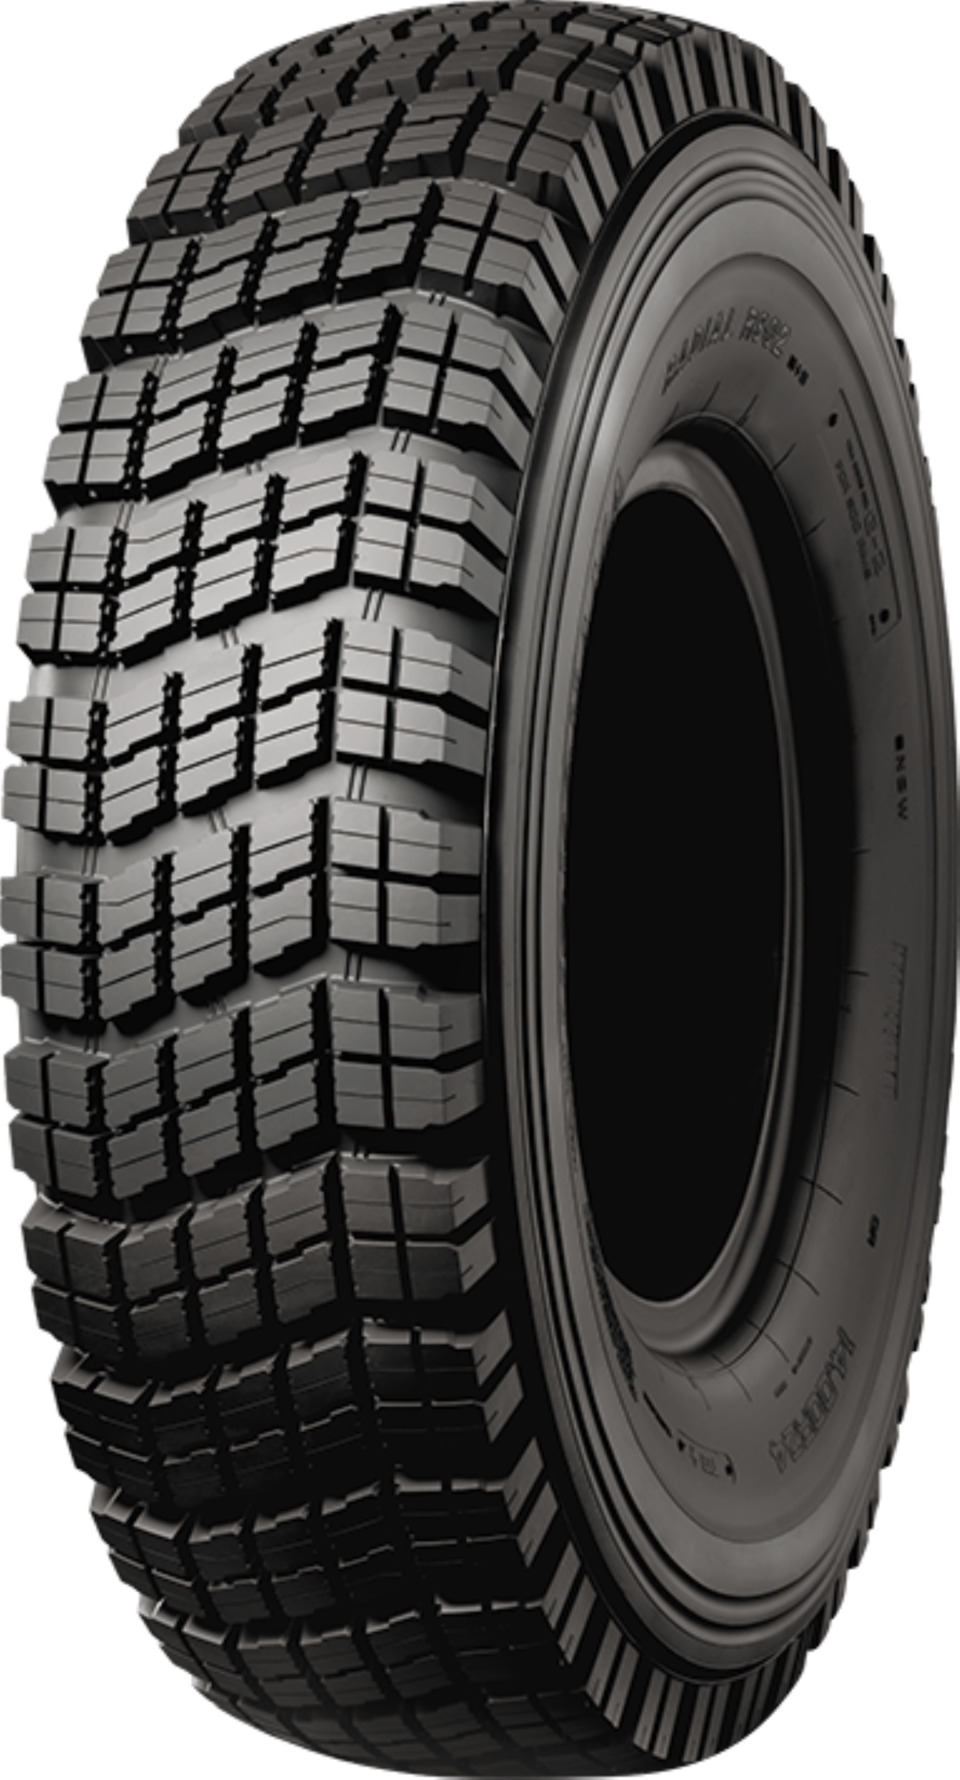 Yokohama Develops New Winter Tire with Special Compound